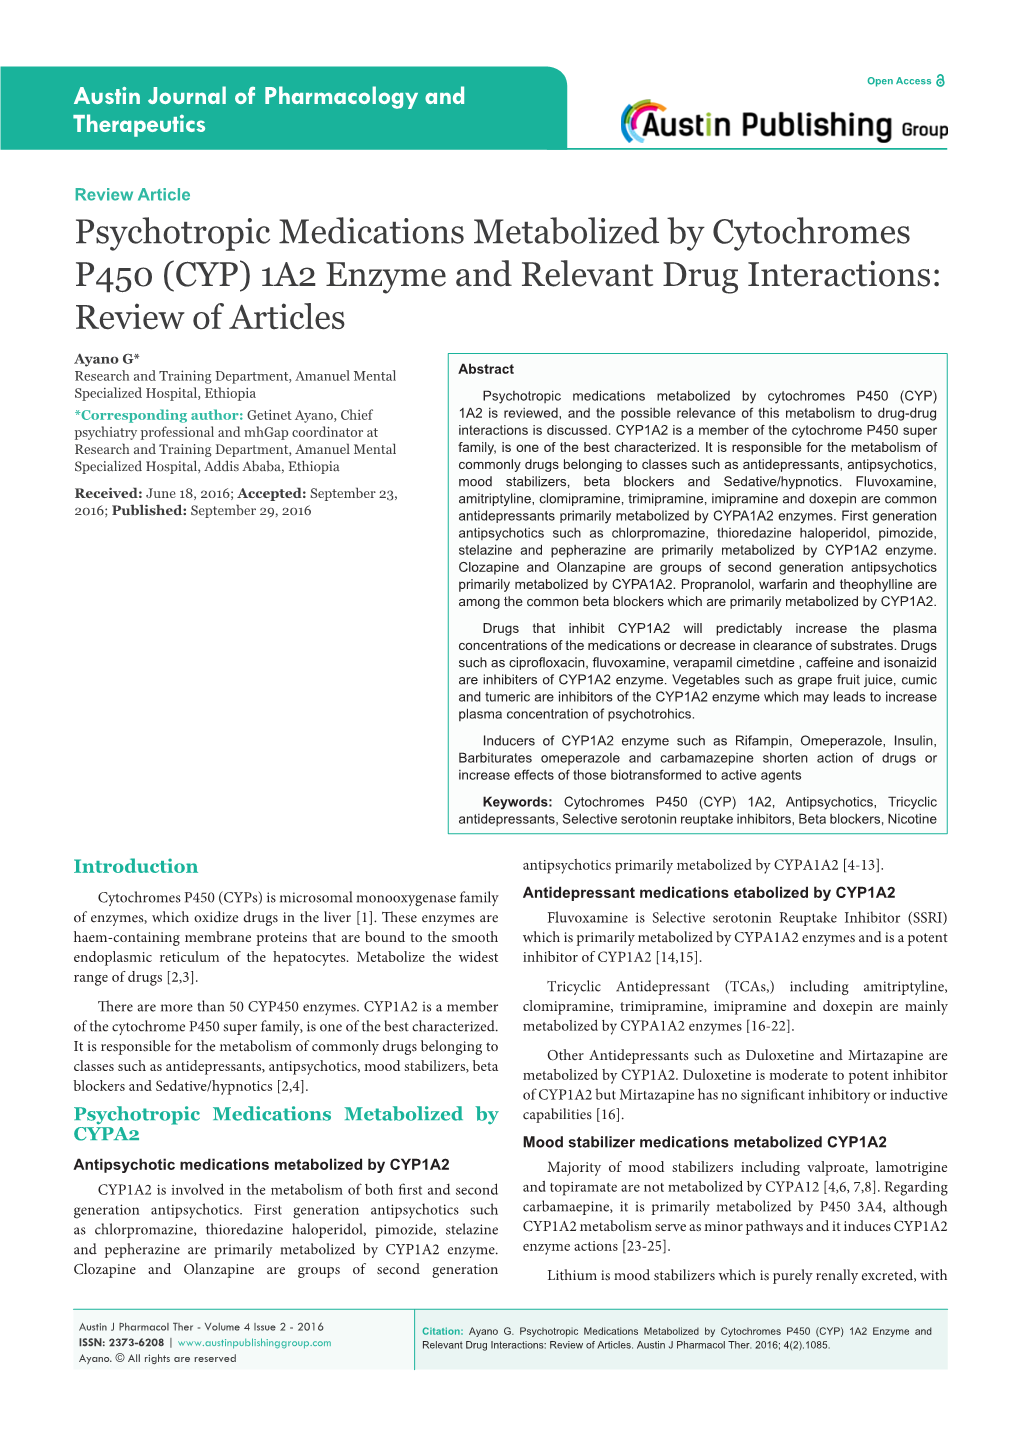 (CYP) 1A2 Enzyme and Relevant Drug Interactions: Review of Articles